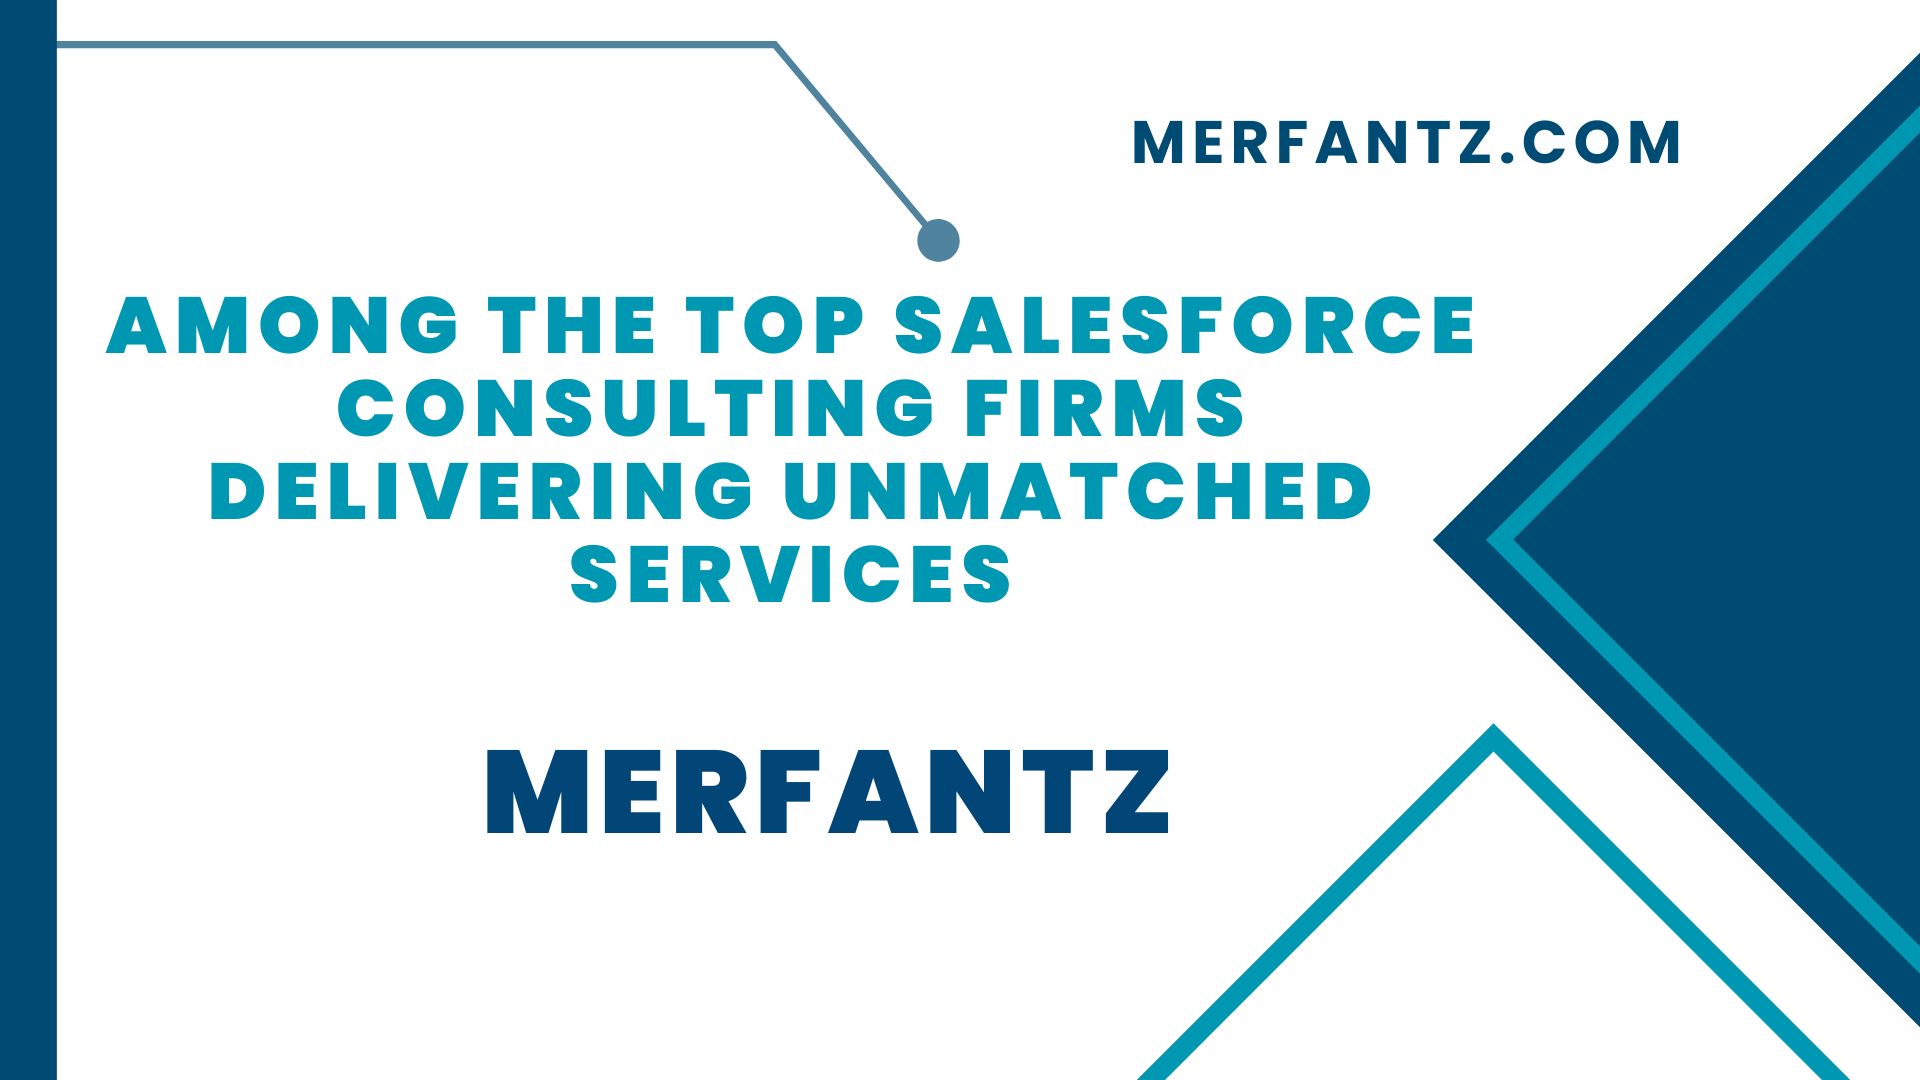 Among the Top Salesforce Consulting Firms Delivering Unmatched Services